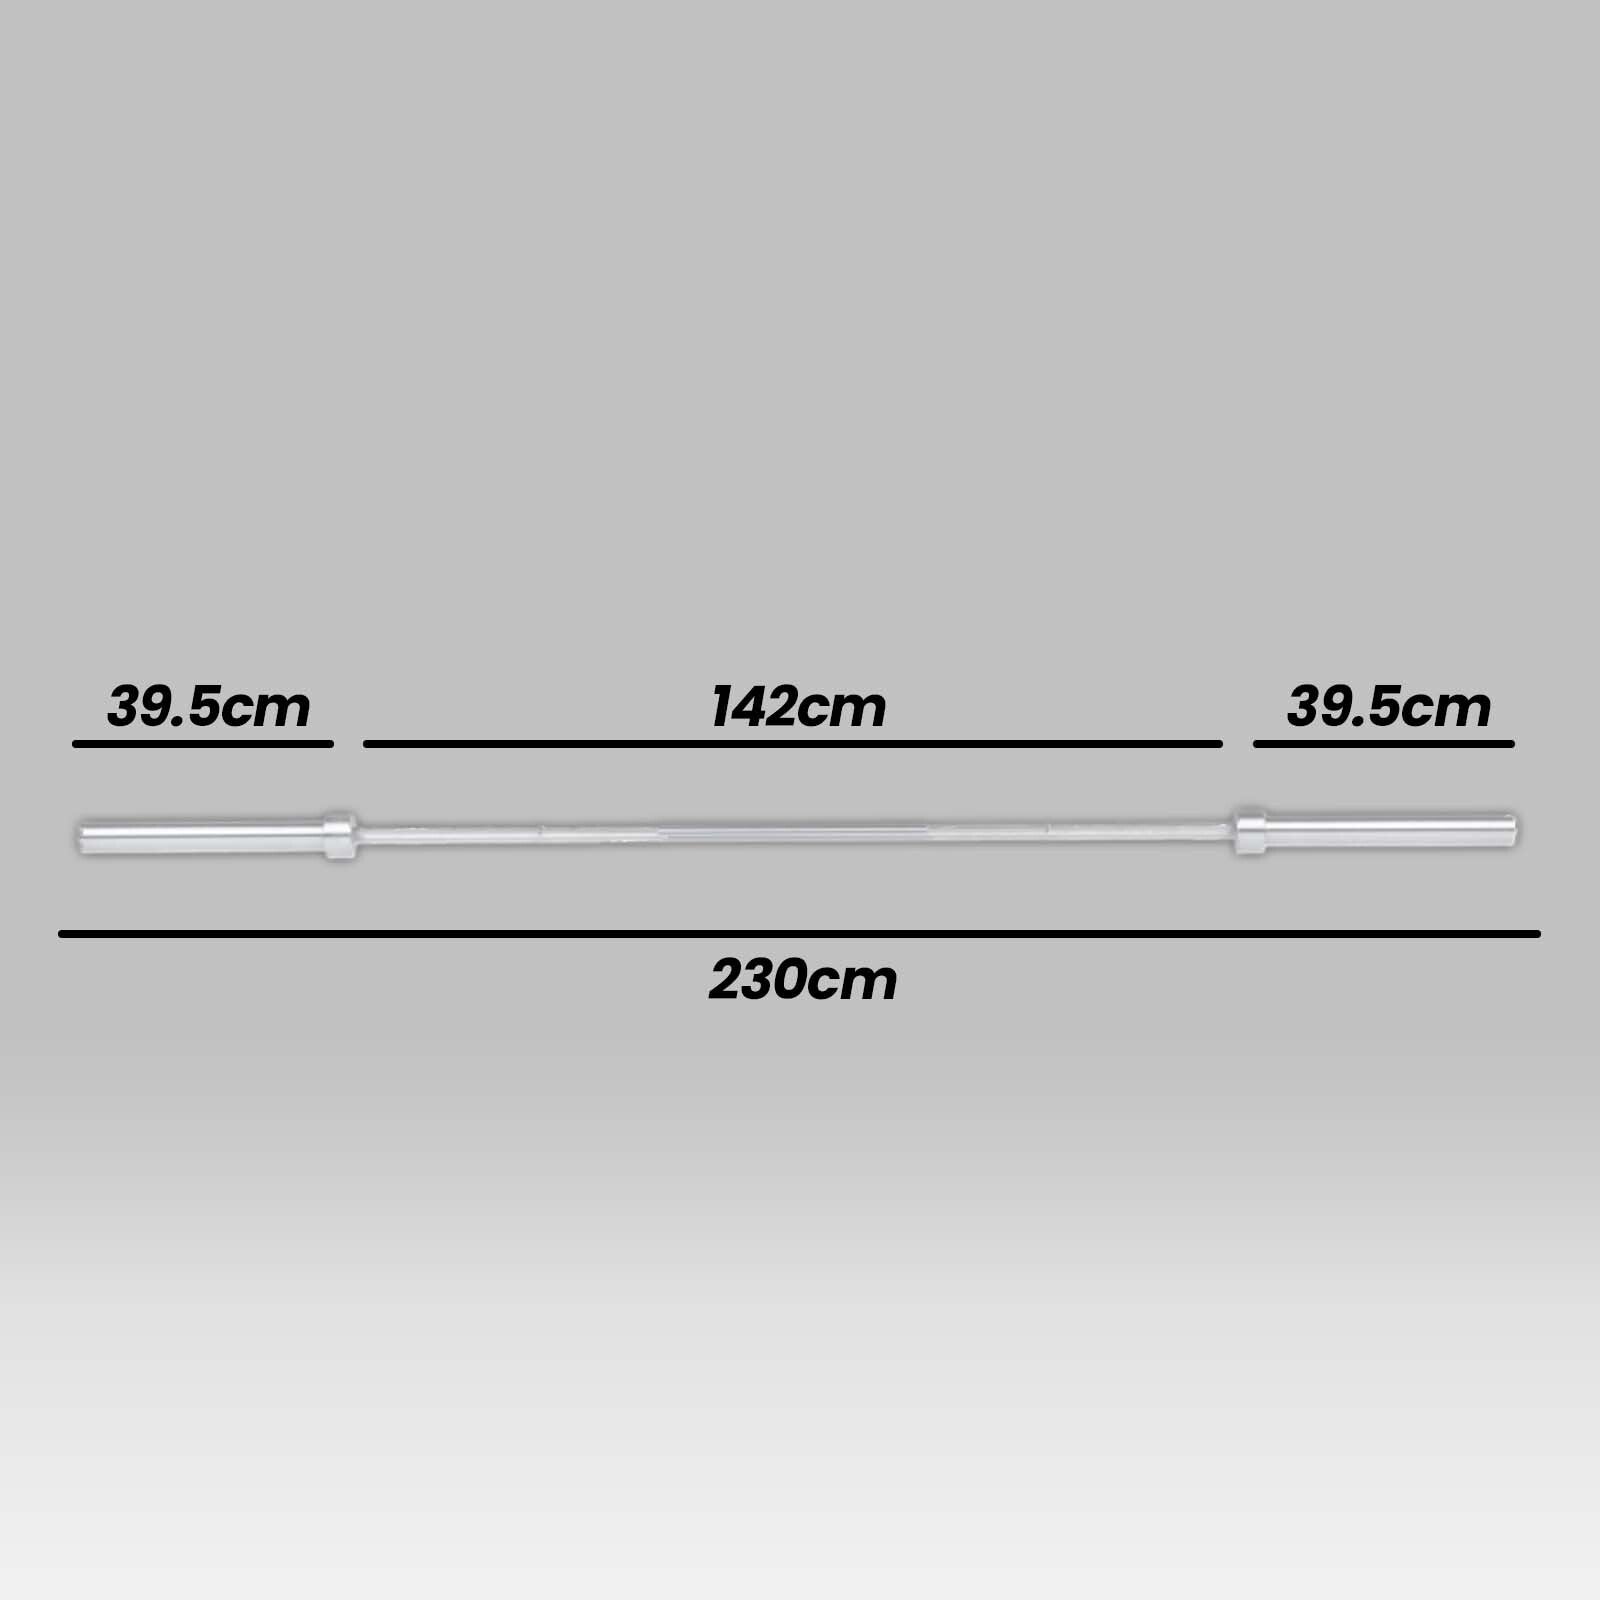 stainless bar dimensions